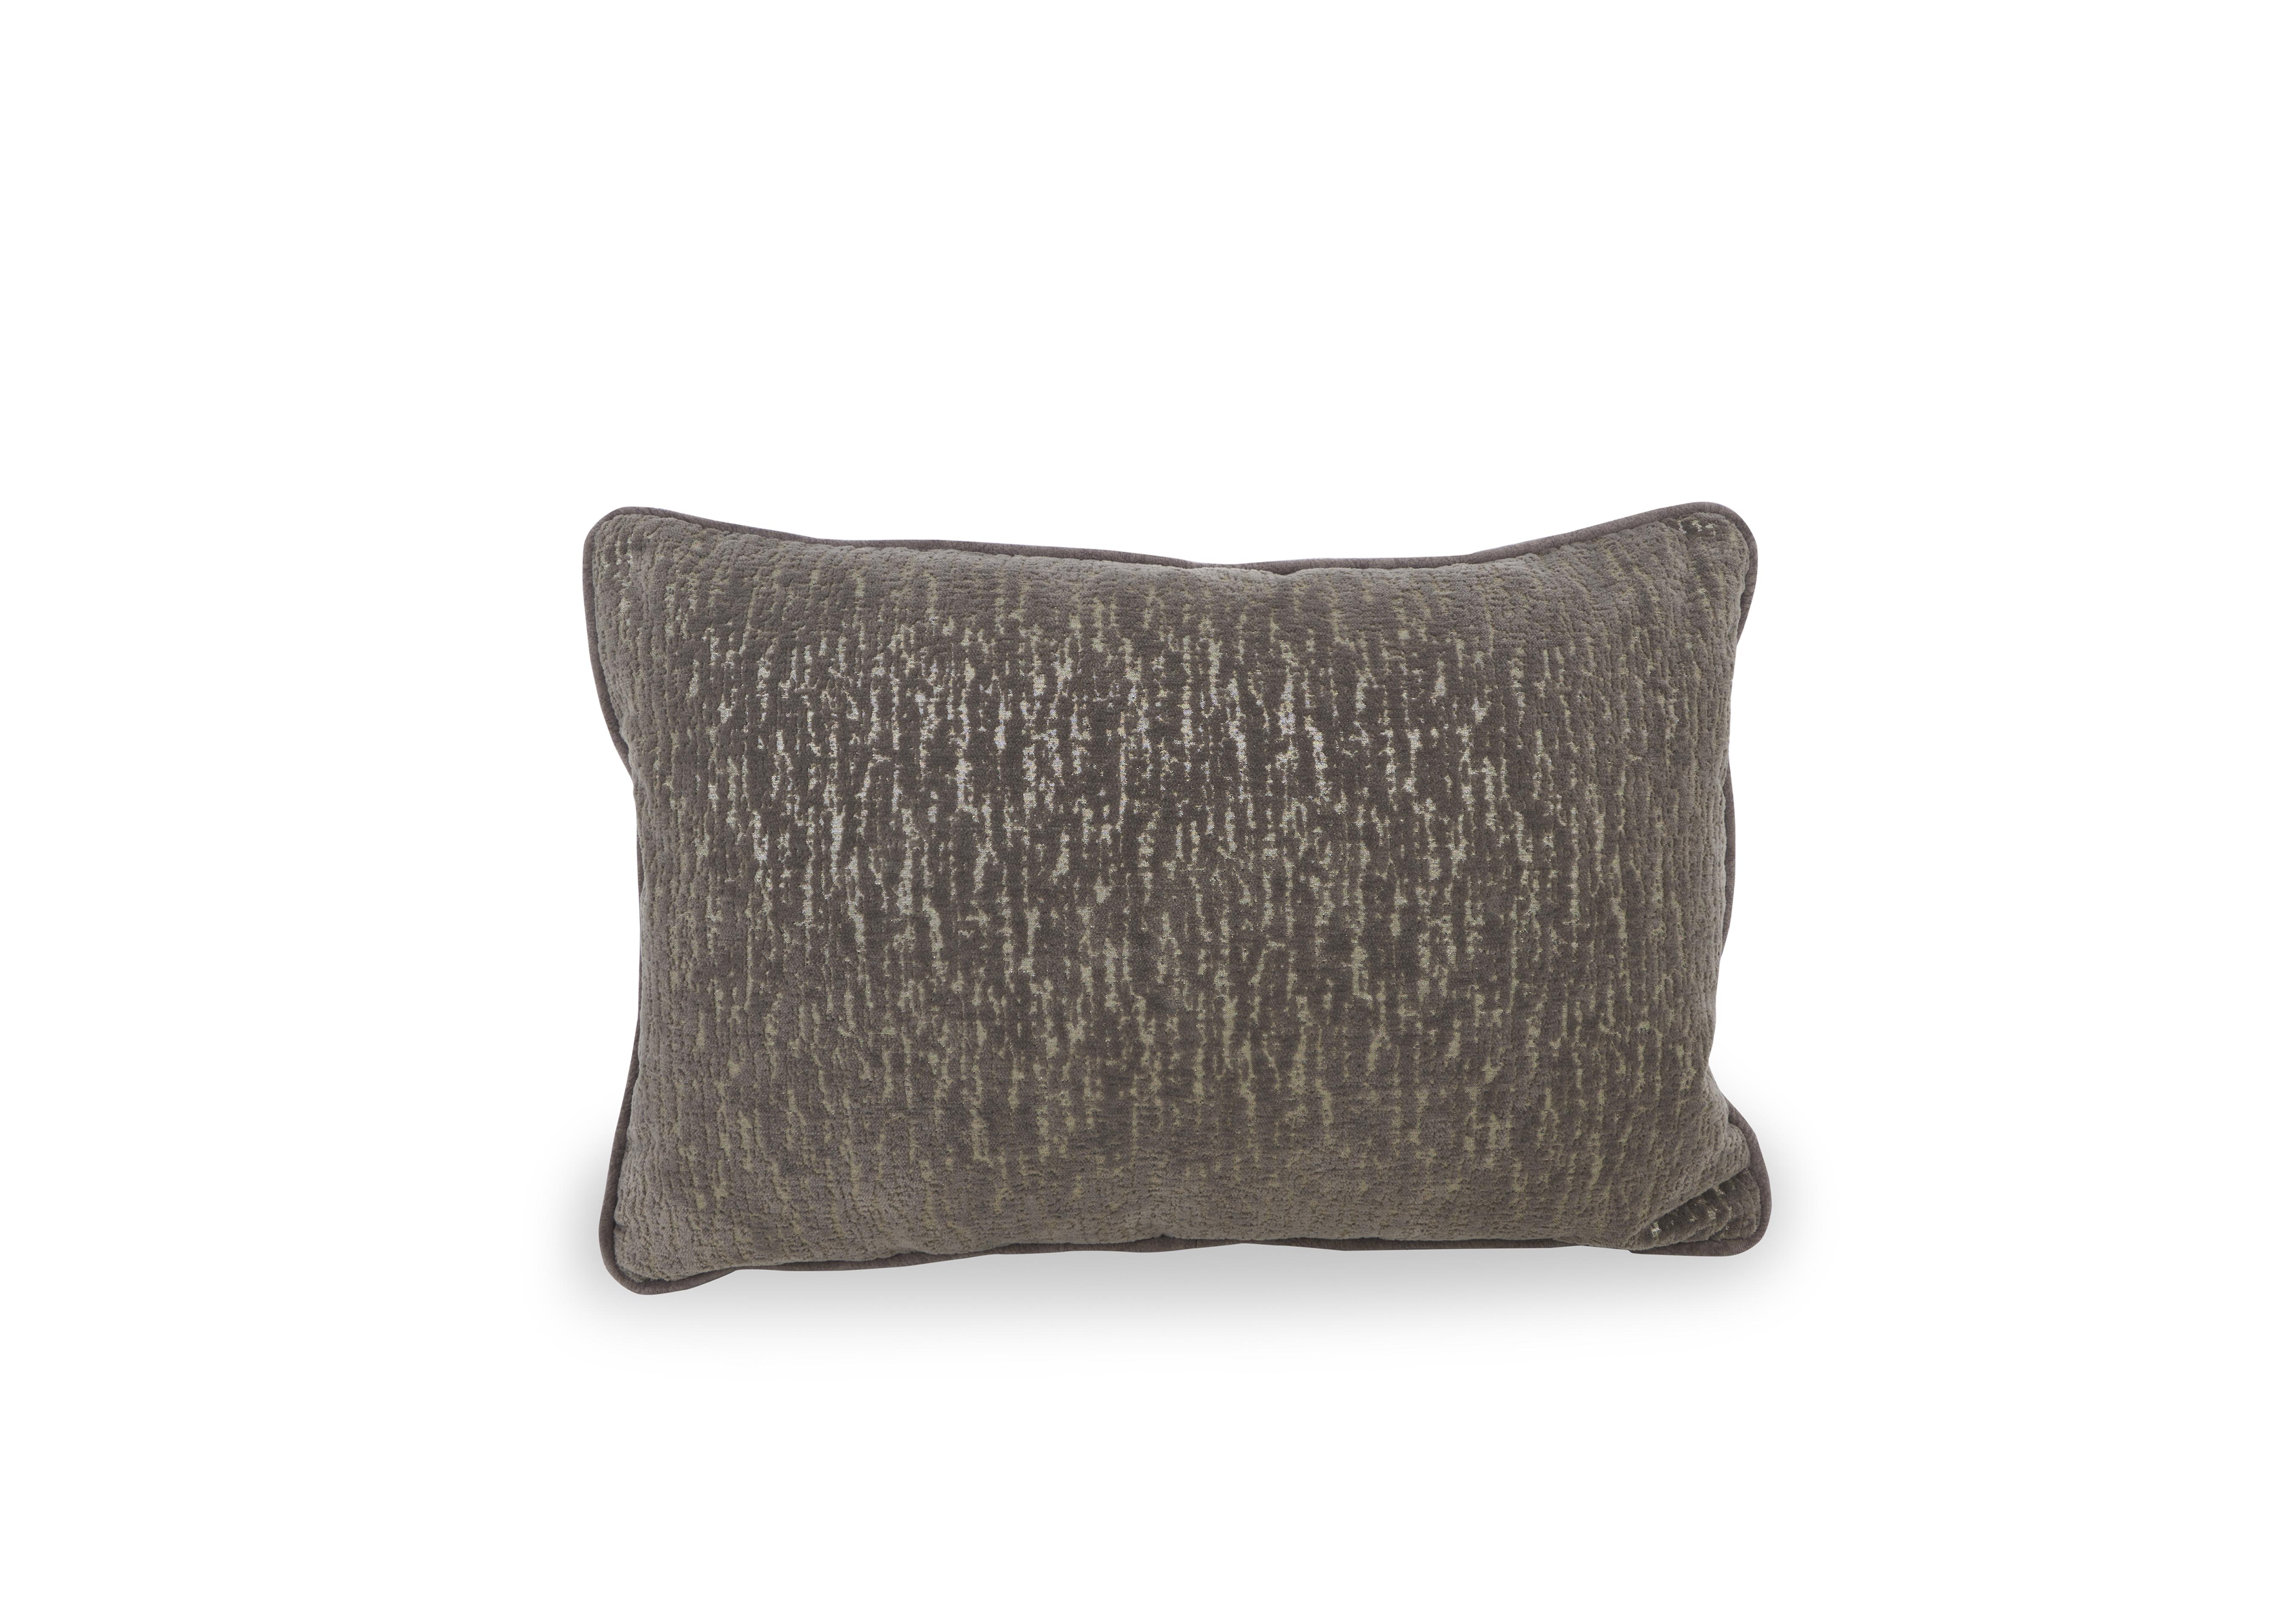 Ariana Bolster Cushion in Fracture Chocolate on Furniture Village